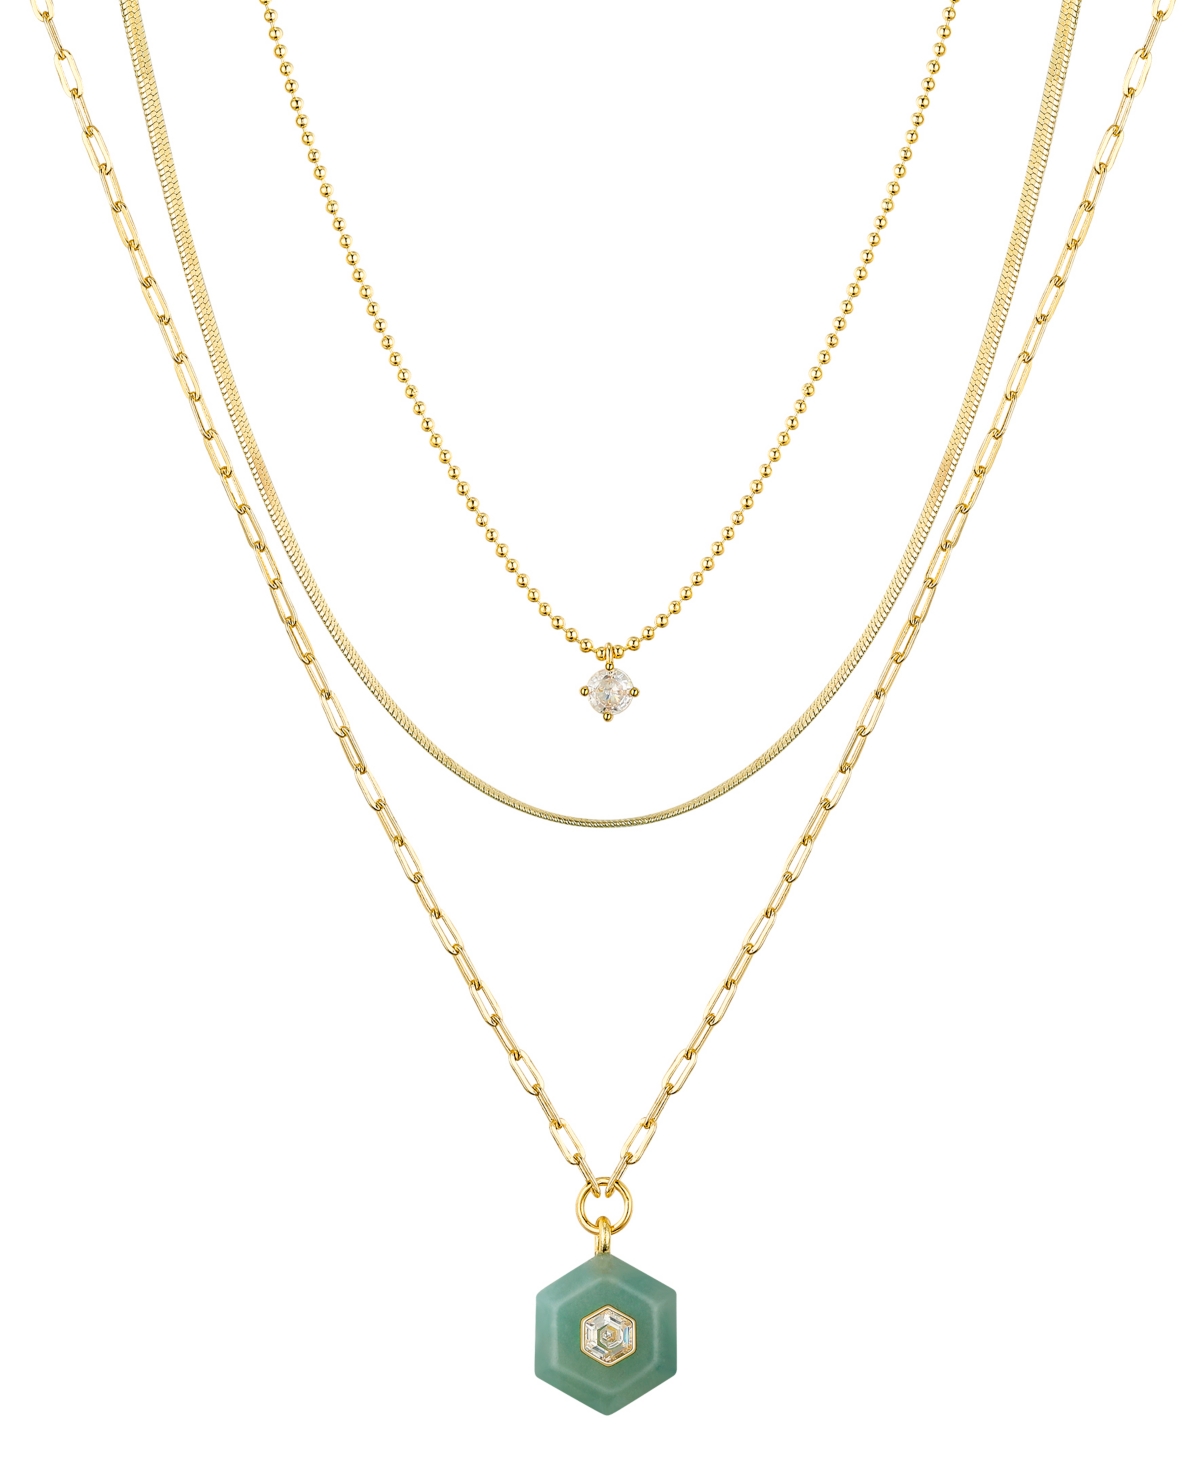 Unwritten Cubic Zirconia And Amazonite Pendant Necklace Set In Gold